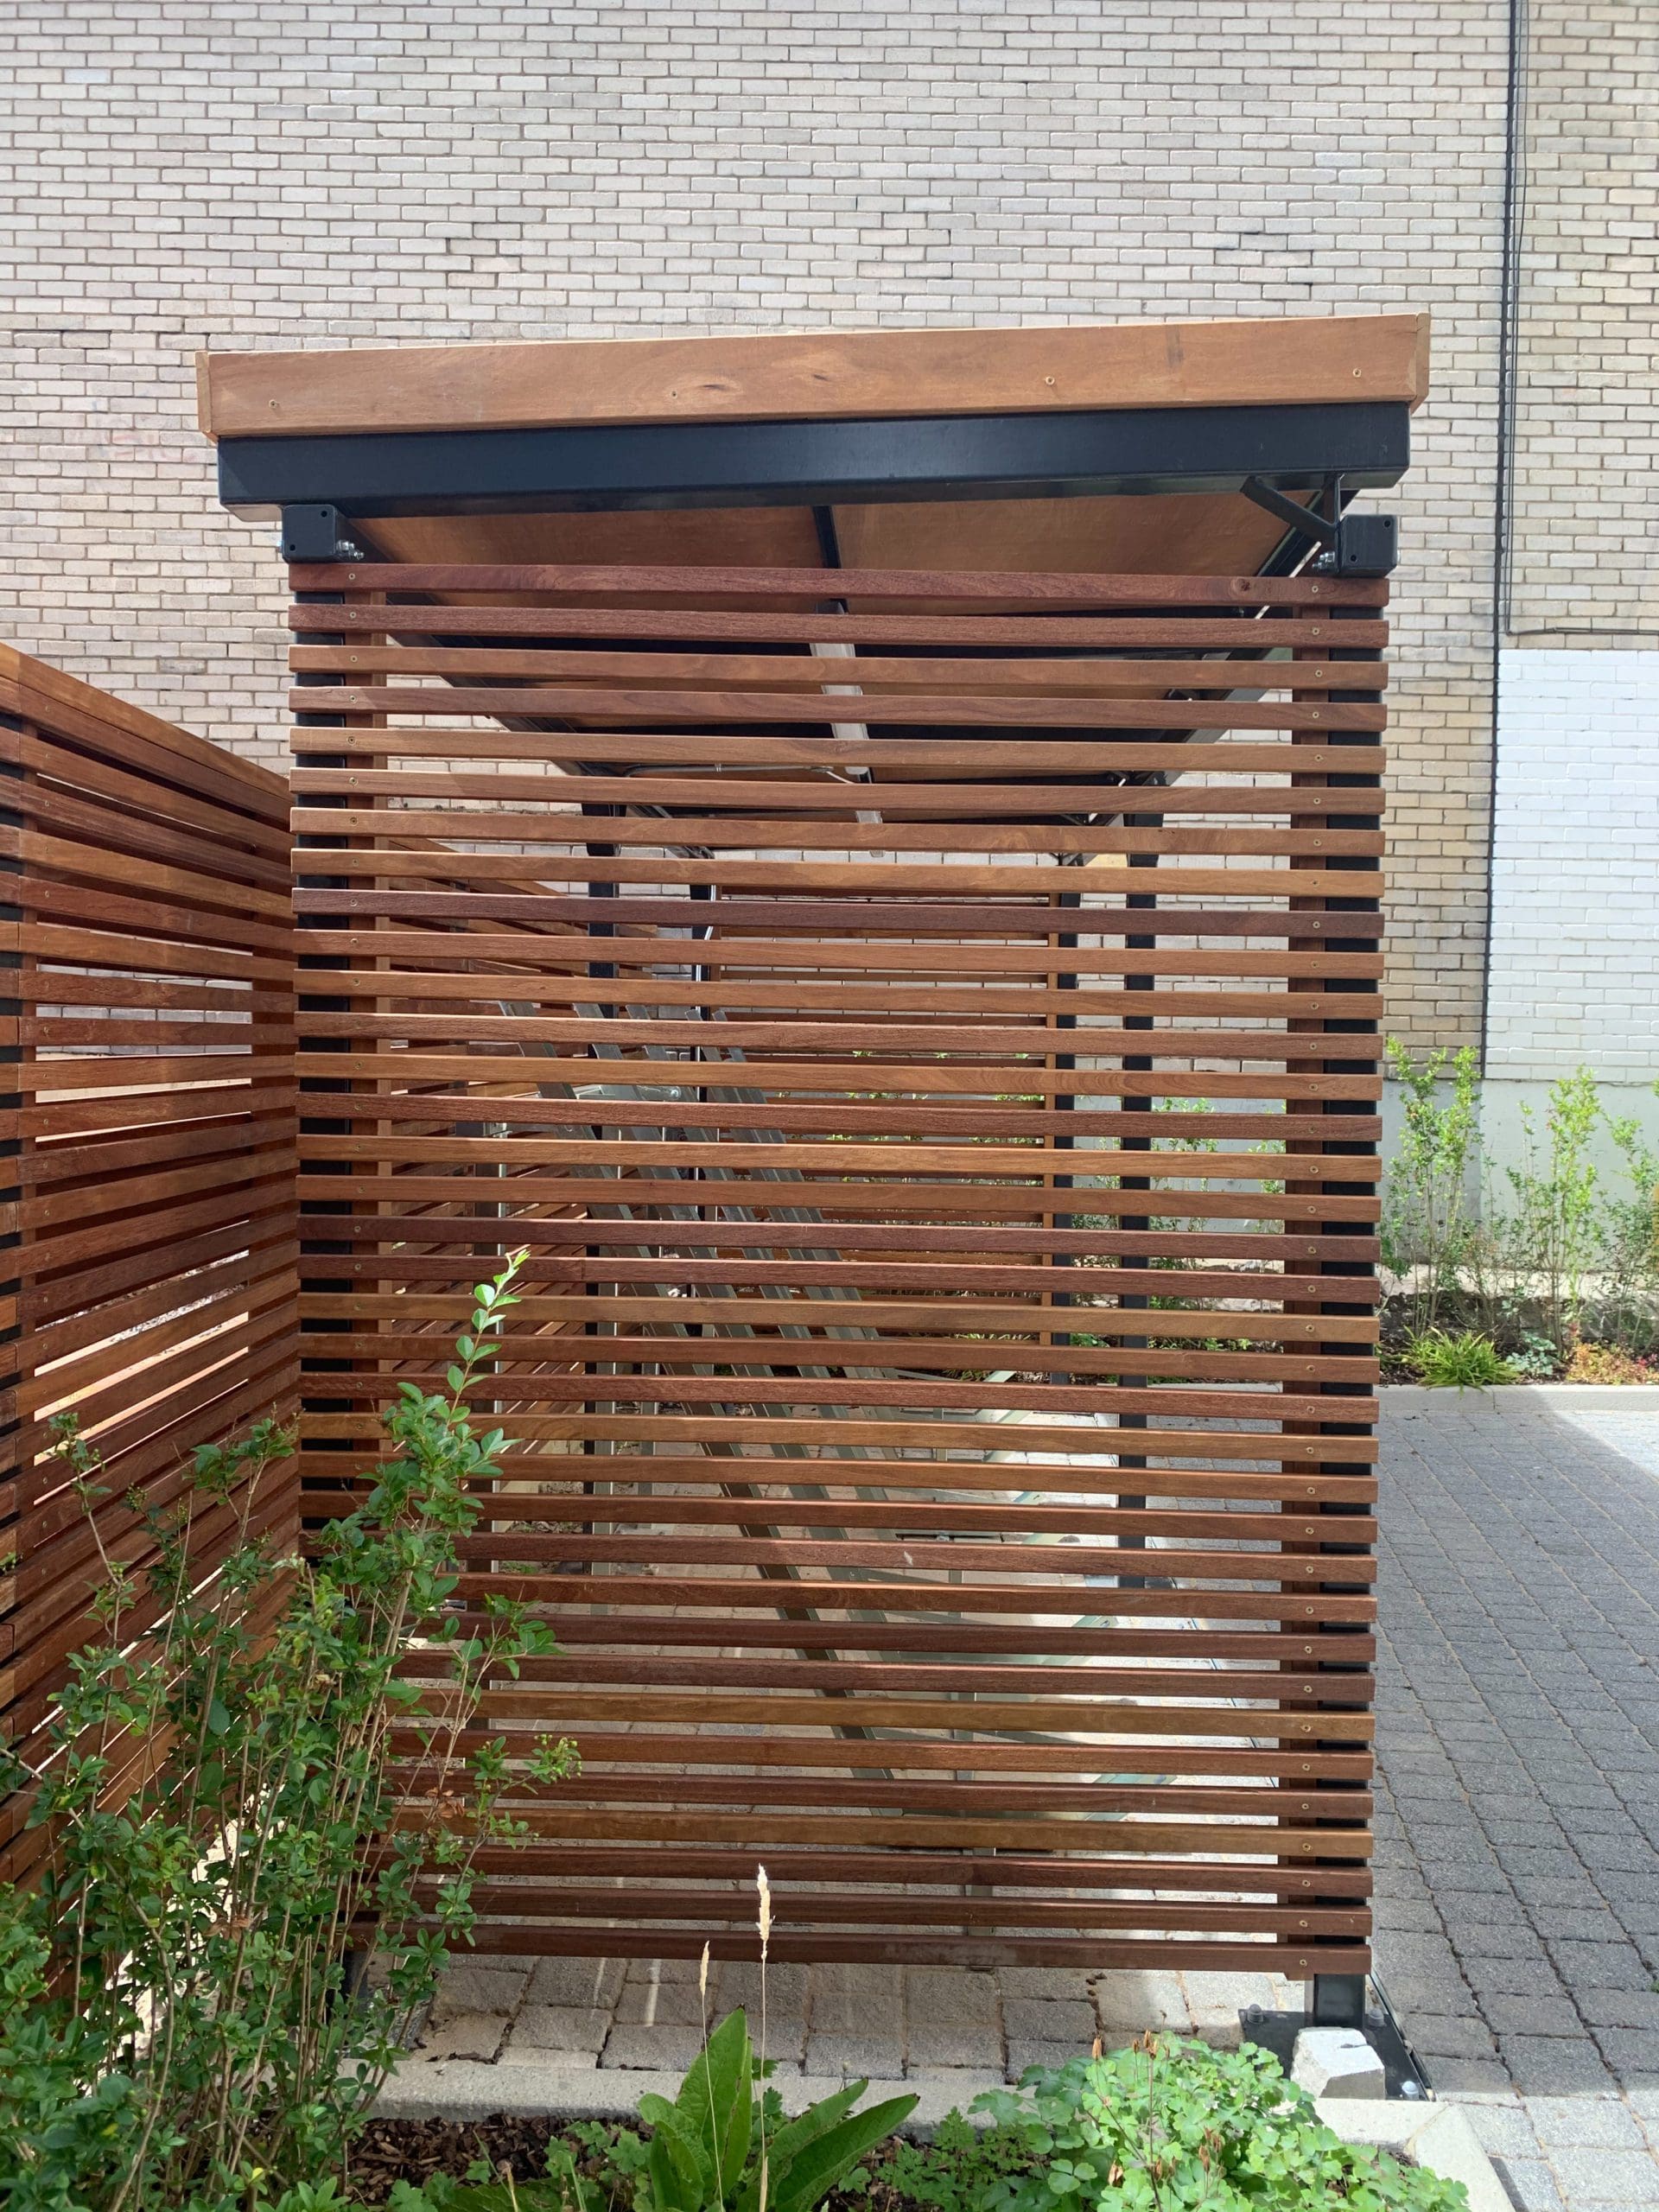 Side shot of wooden bike storage canopy and matching wooden fence